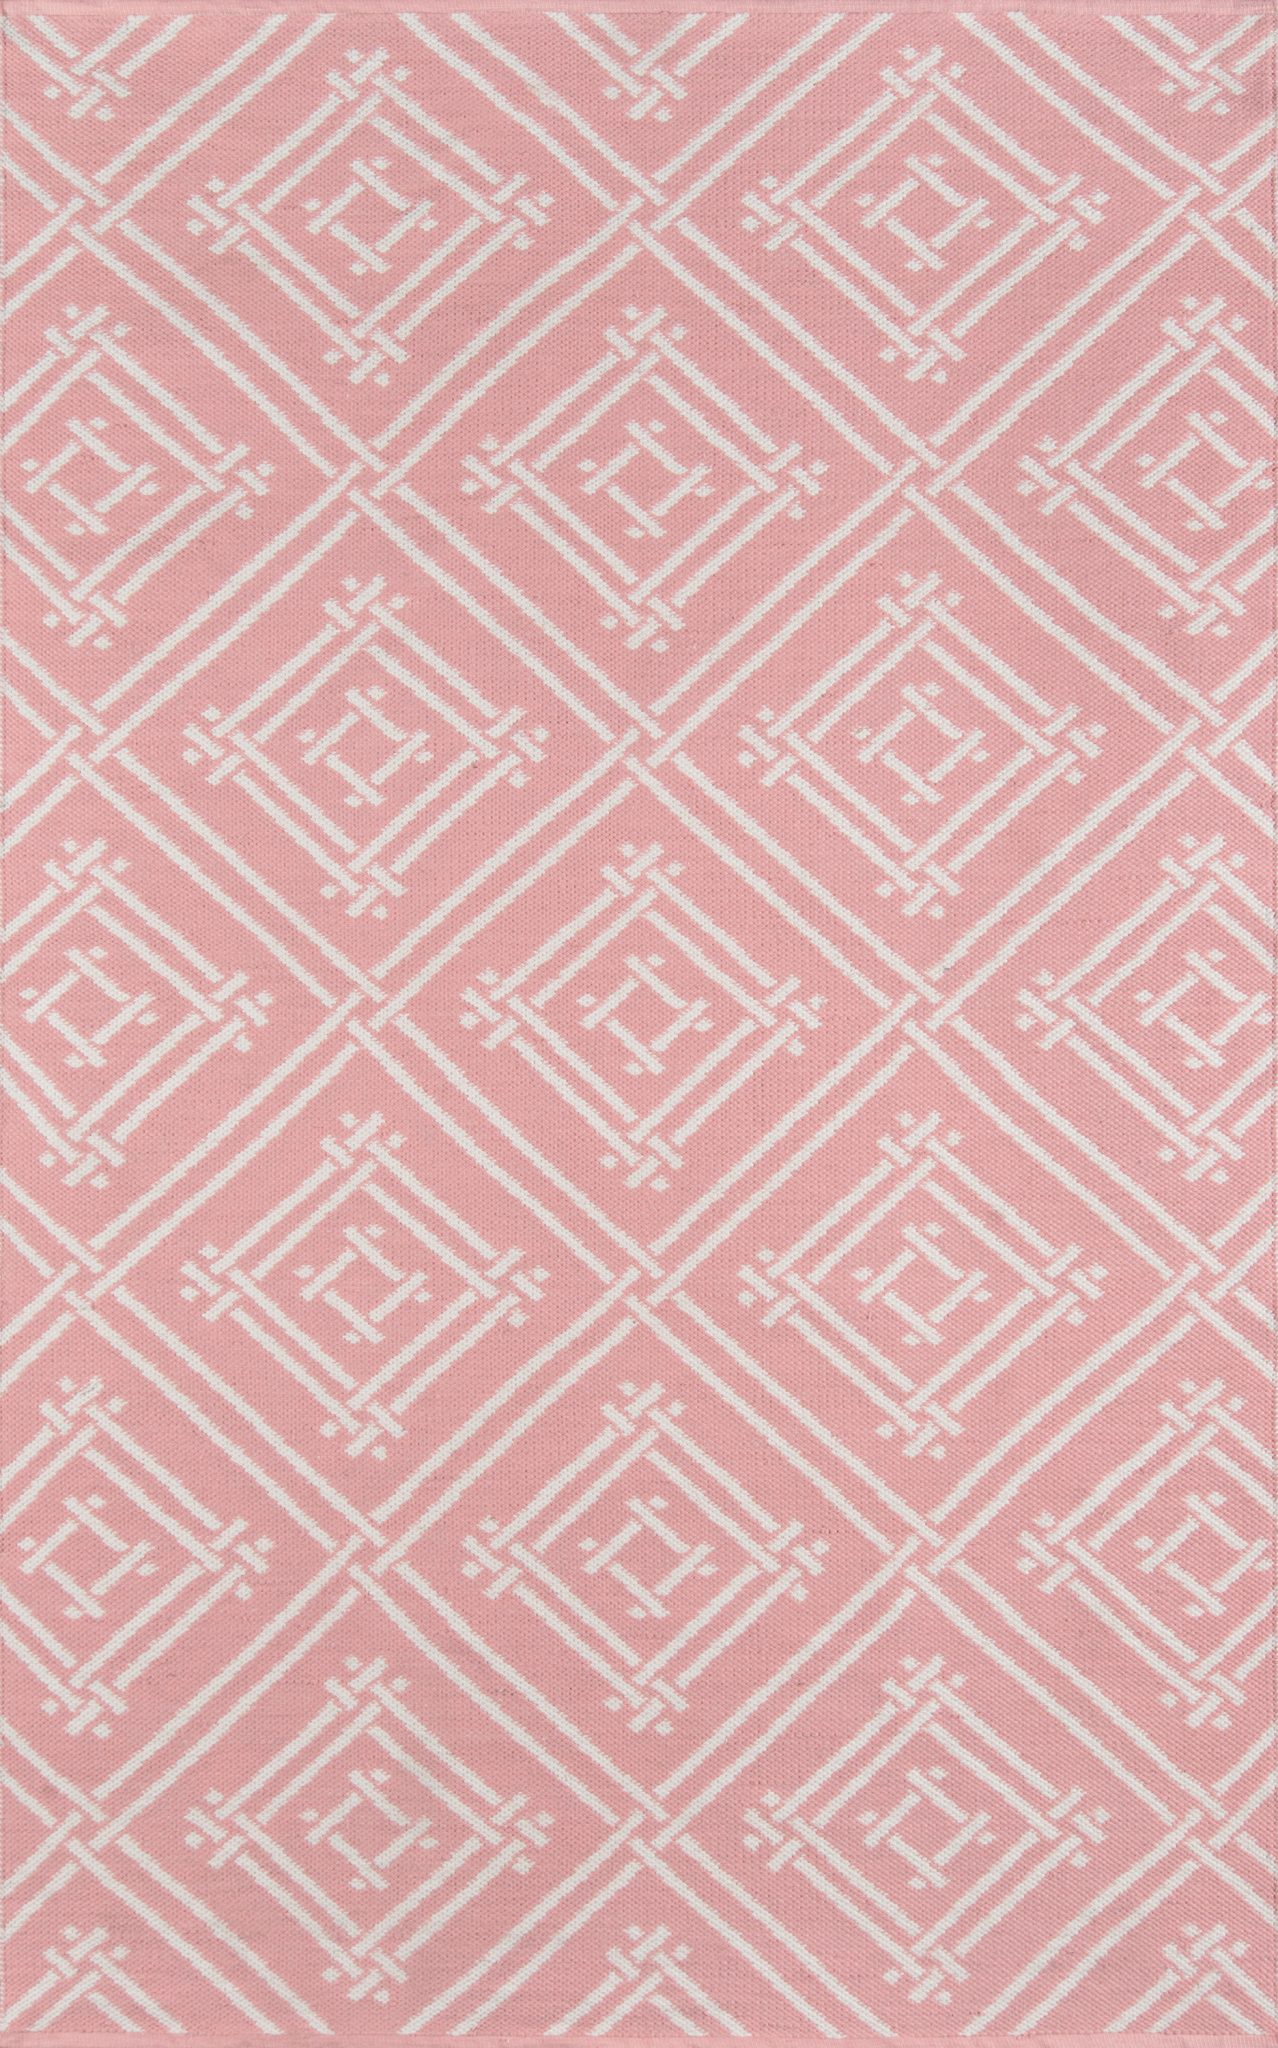 Momeni Palm Beach Pam 3 Pink Area Rug, Pink Area Rugs